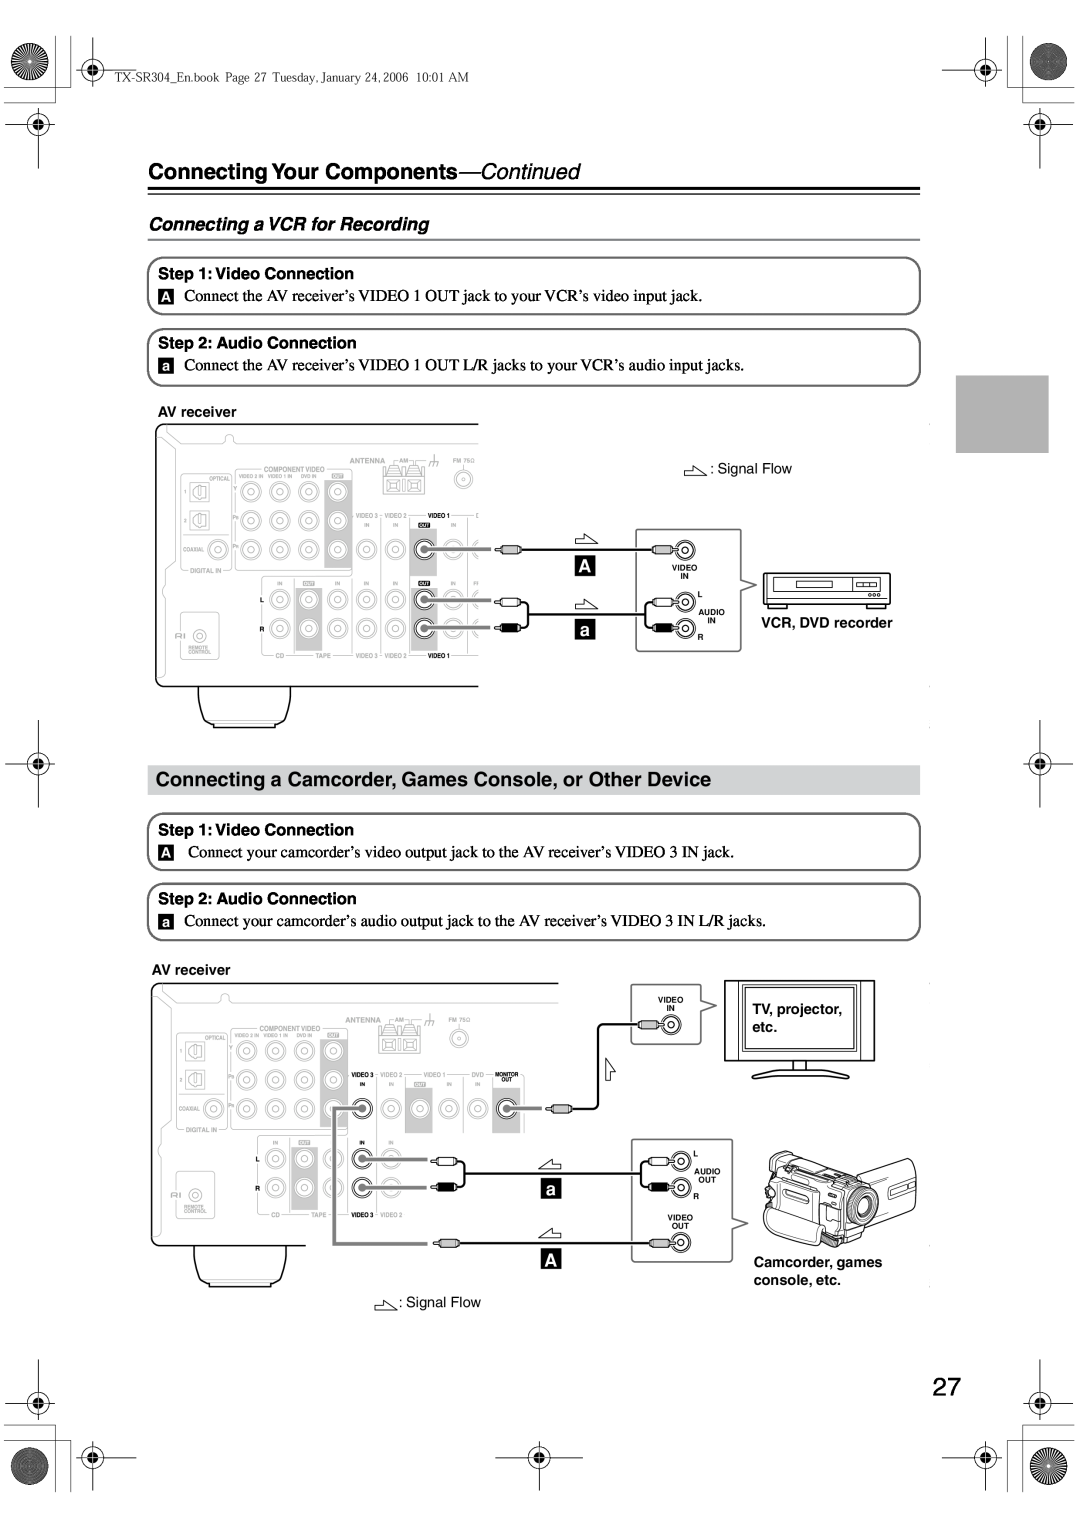 Onkyo TX-SR8440, TX-SR404, TX-SR304E instruction manual Connecting a VCR for Recording, Connecting Your Components-Continued 